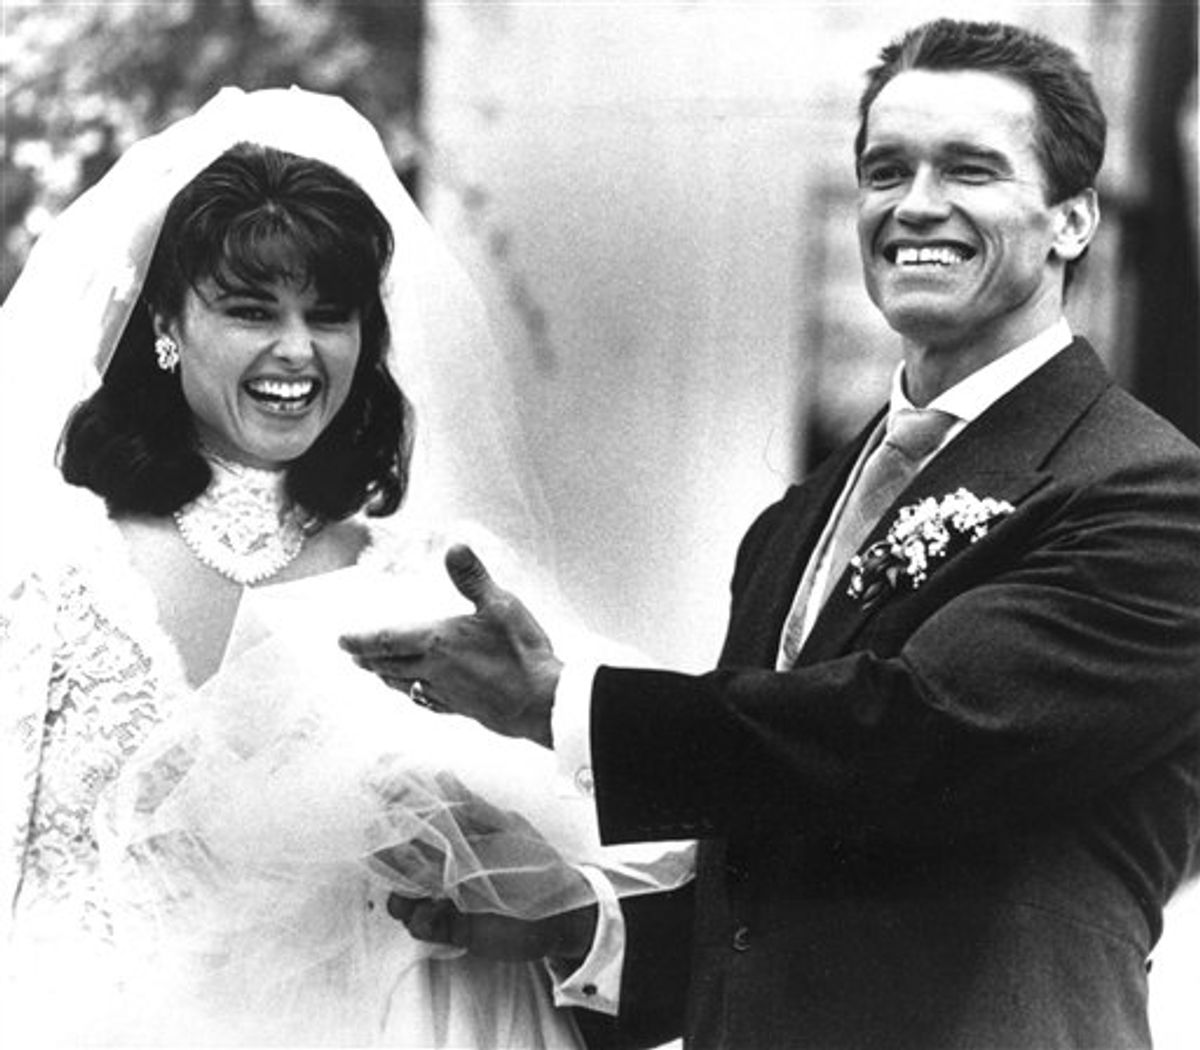 FILE -- In an April 26, 1986 file photo Maria Shriver, left, and Arnold Schwarzenegger pose outside St. Francis Xavier Church, in Hyannis, Mass., after they were married.  Former California Gov. Arnold Schwarzenegger and his wife of 25 years, Maria Shriver, announced Monday May 9, 2011, that they are separating.  (AP Photo/Mike Kullenfile)   (AP)